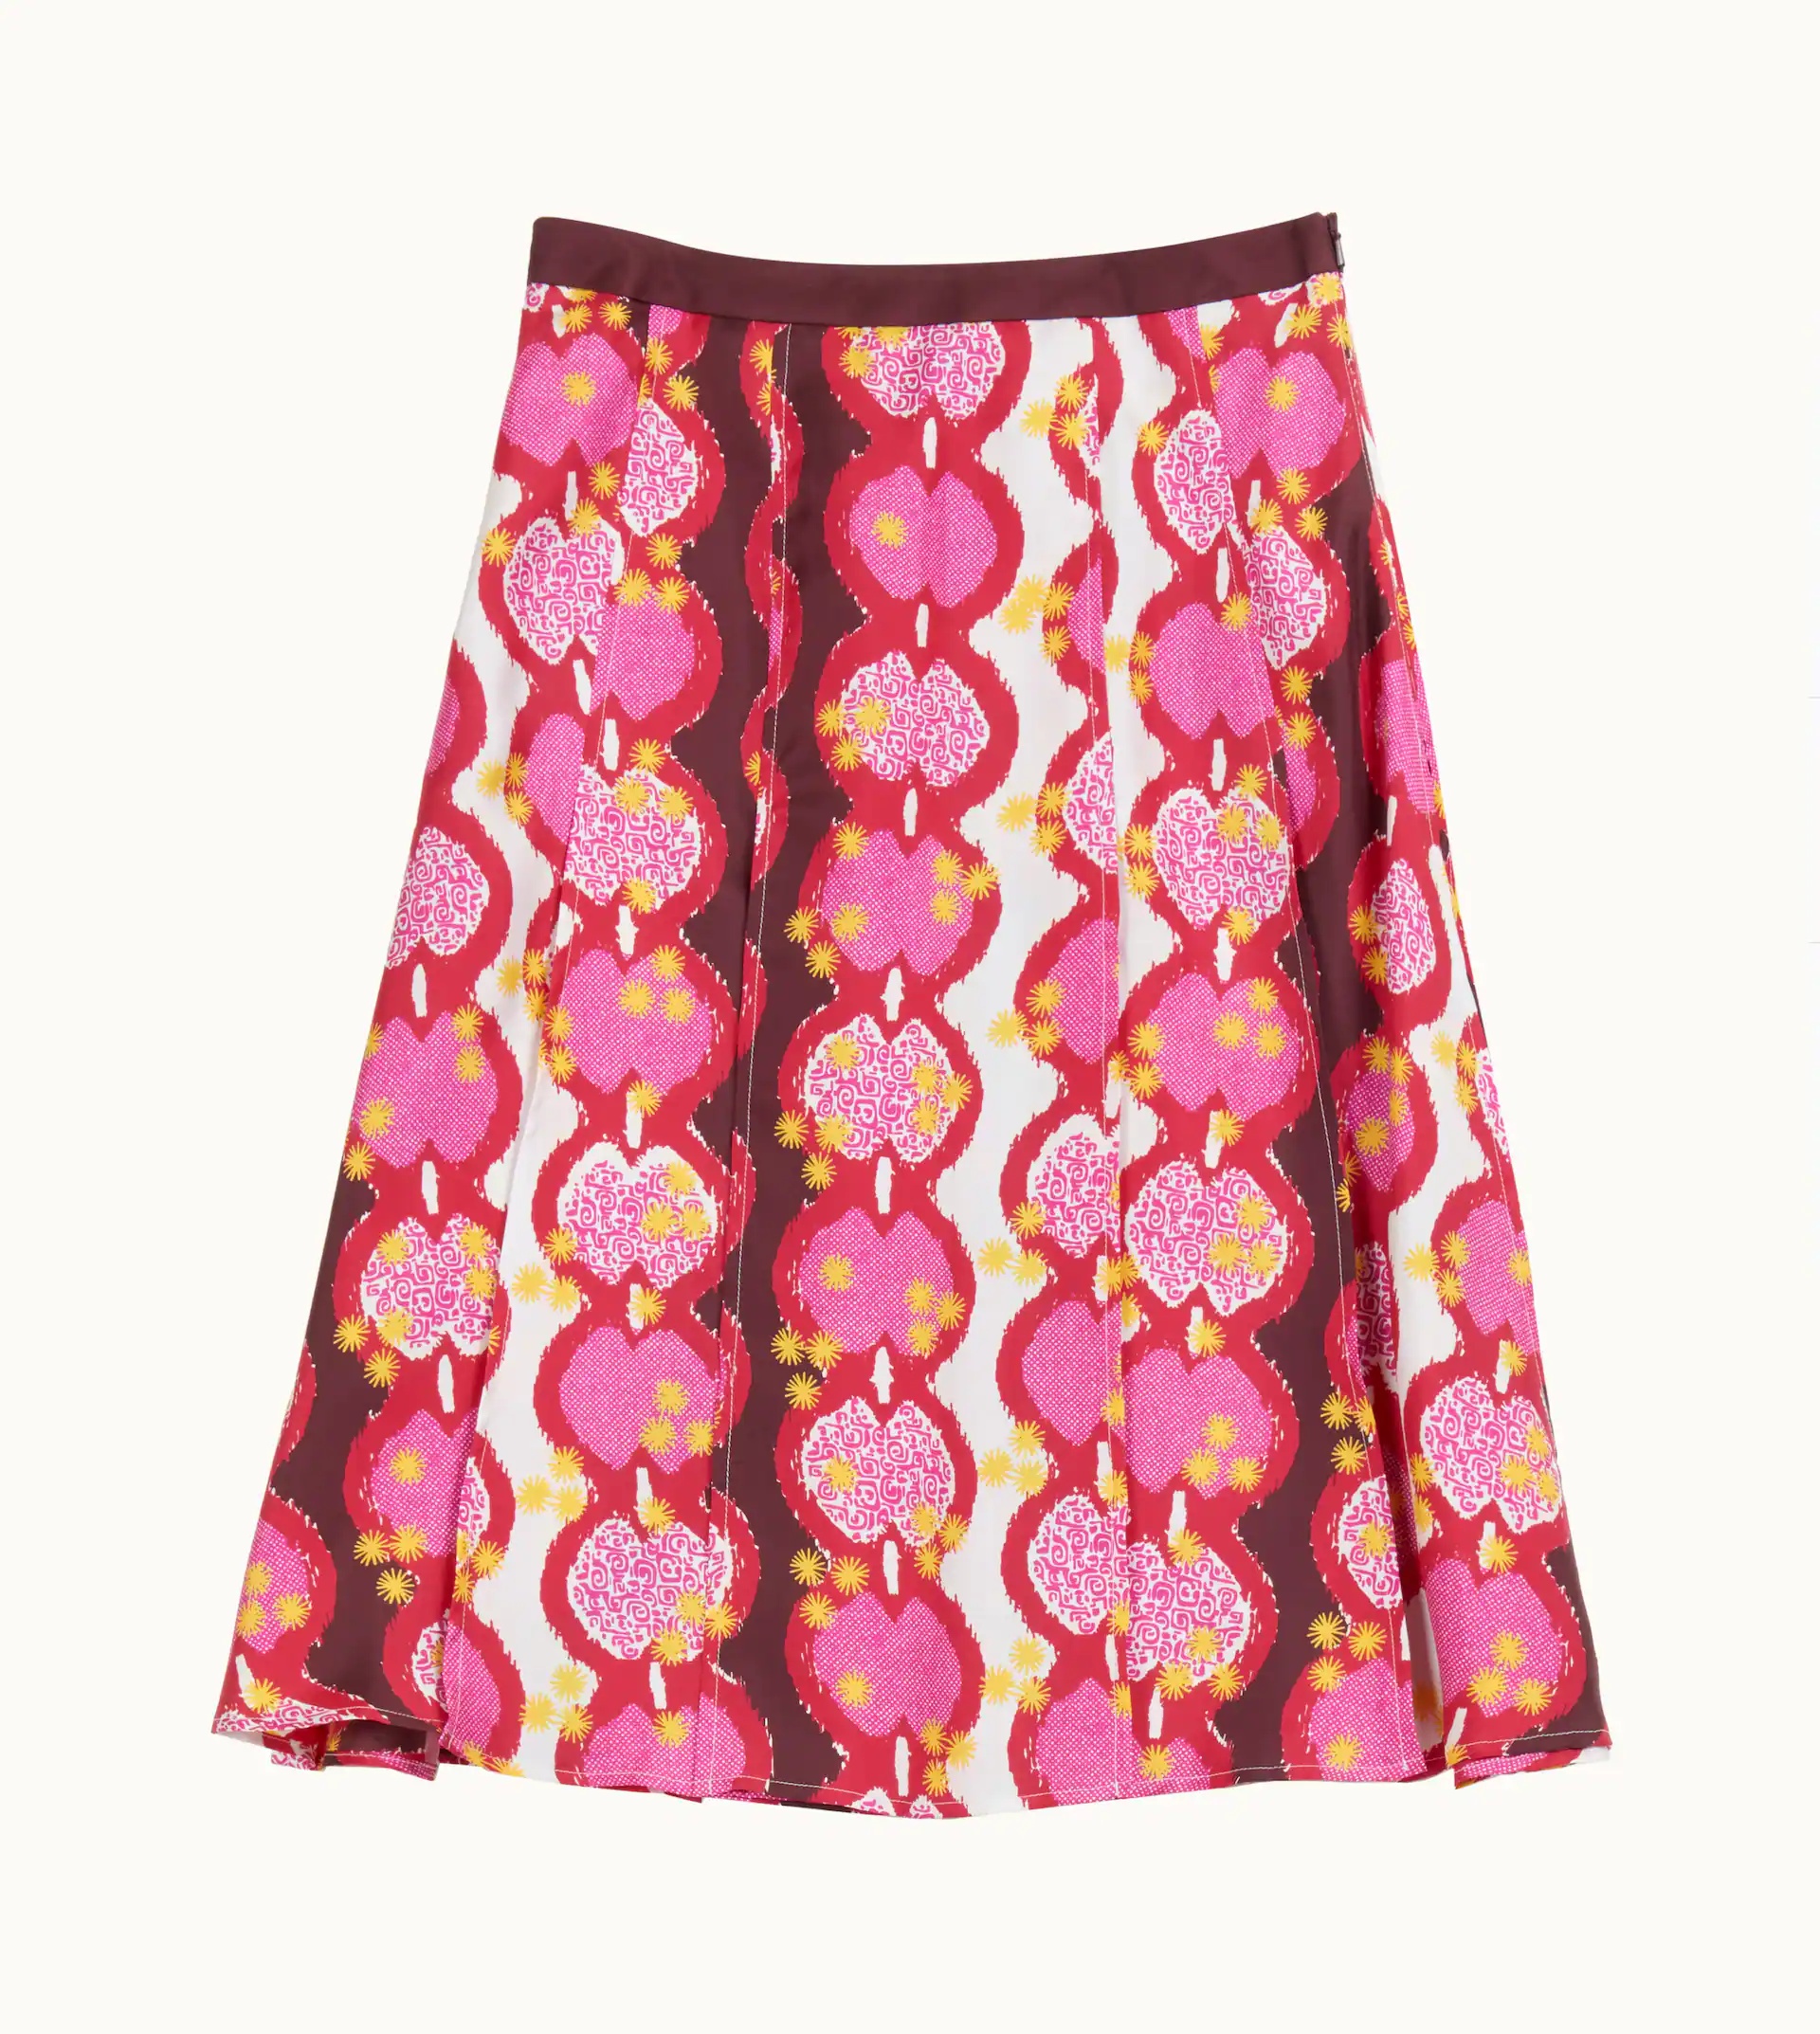 SKIRT IN SILK - WHITE, RED, PINK - 1